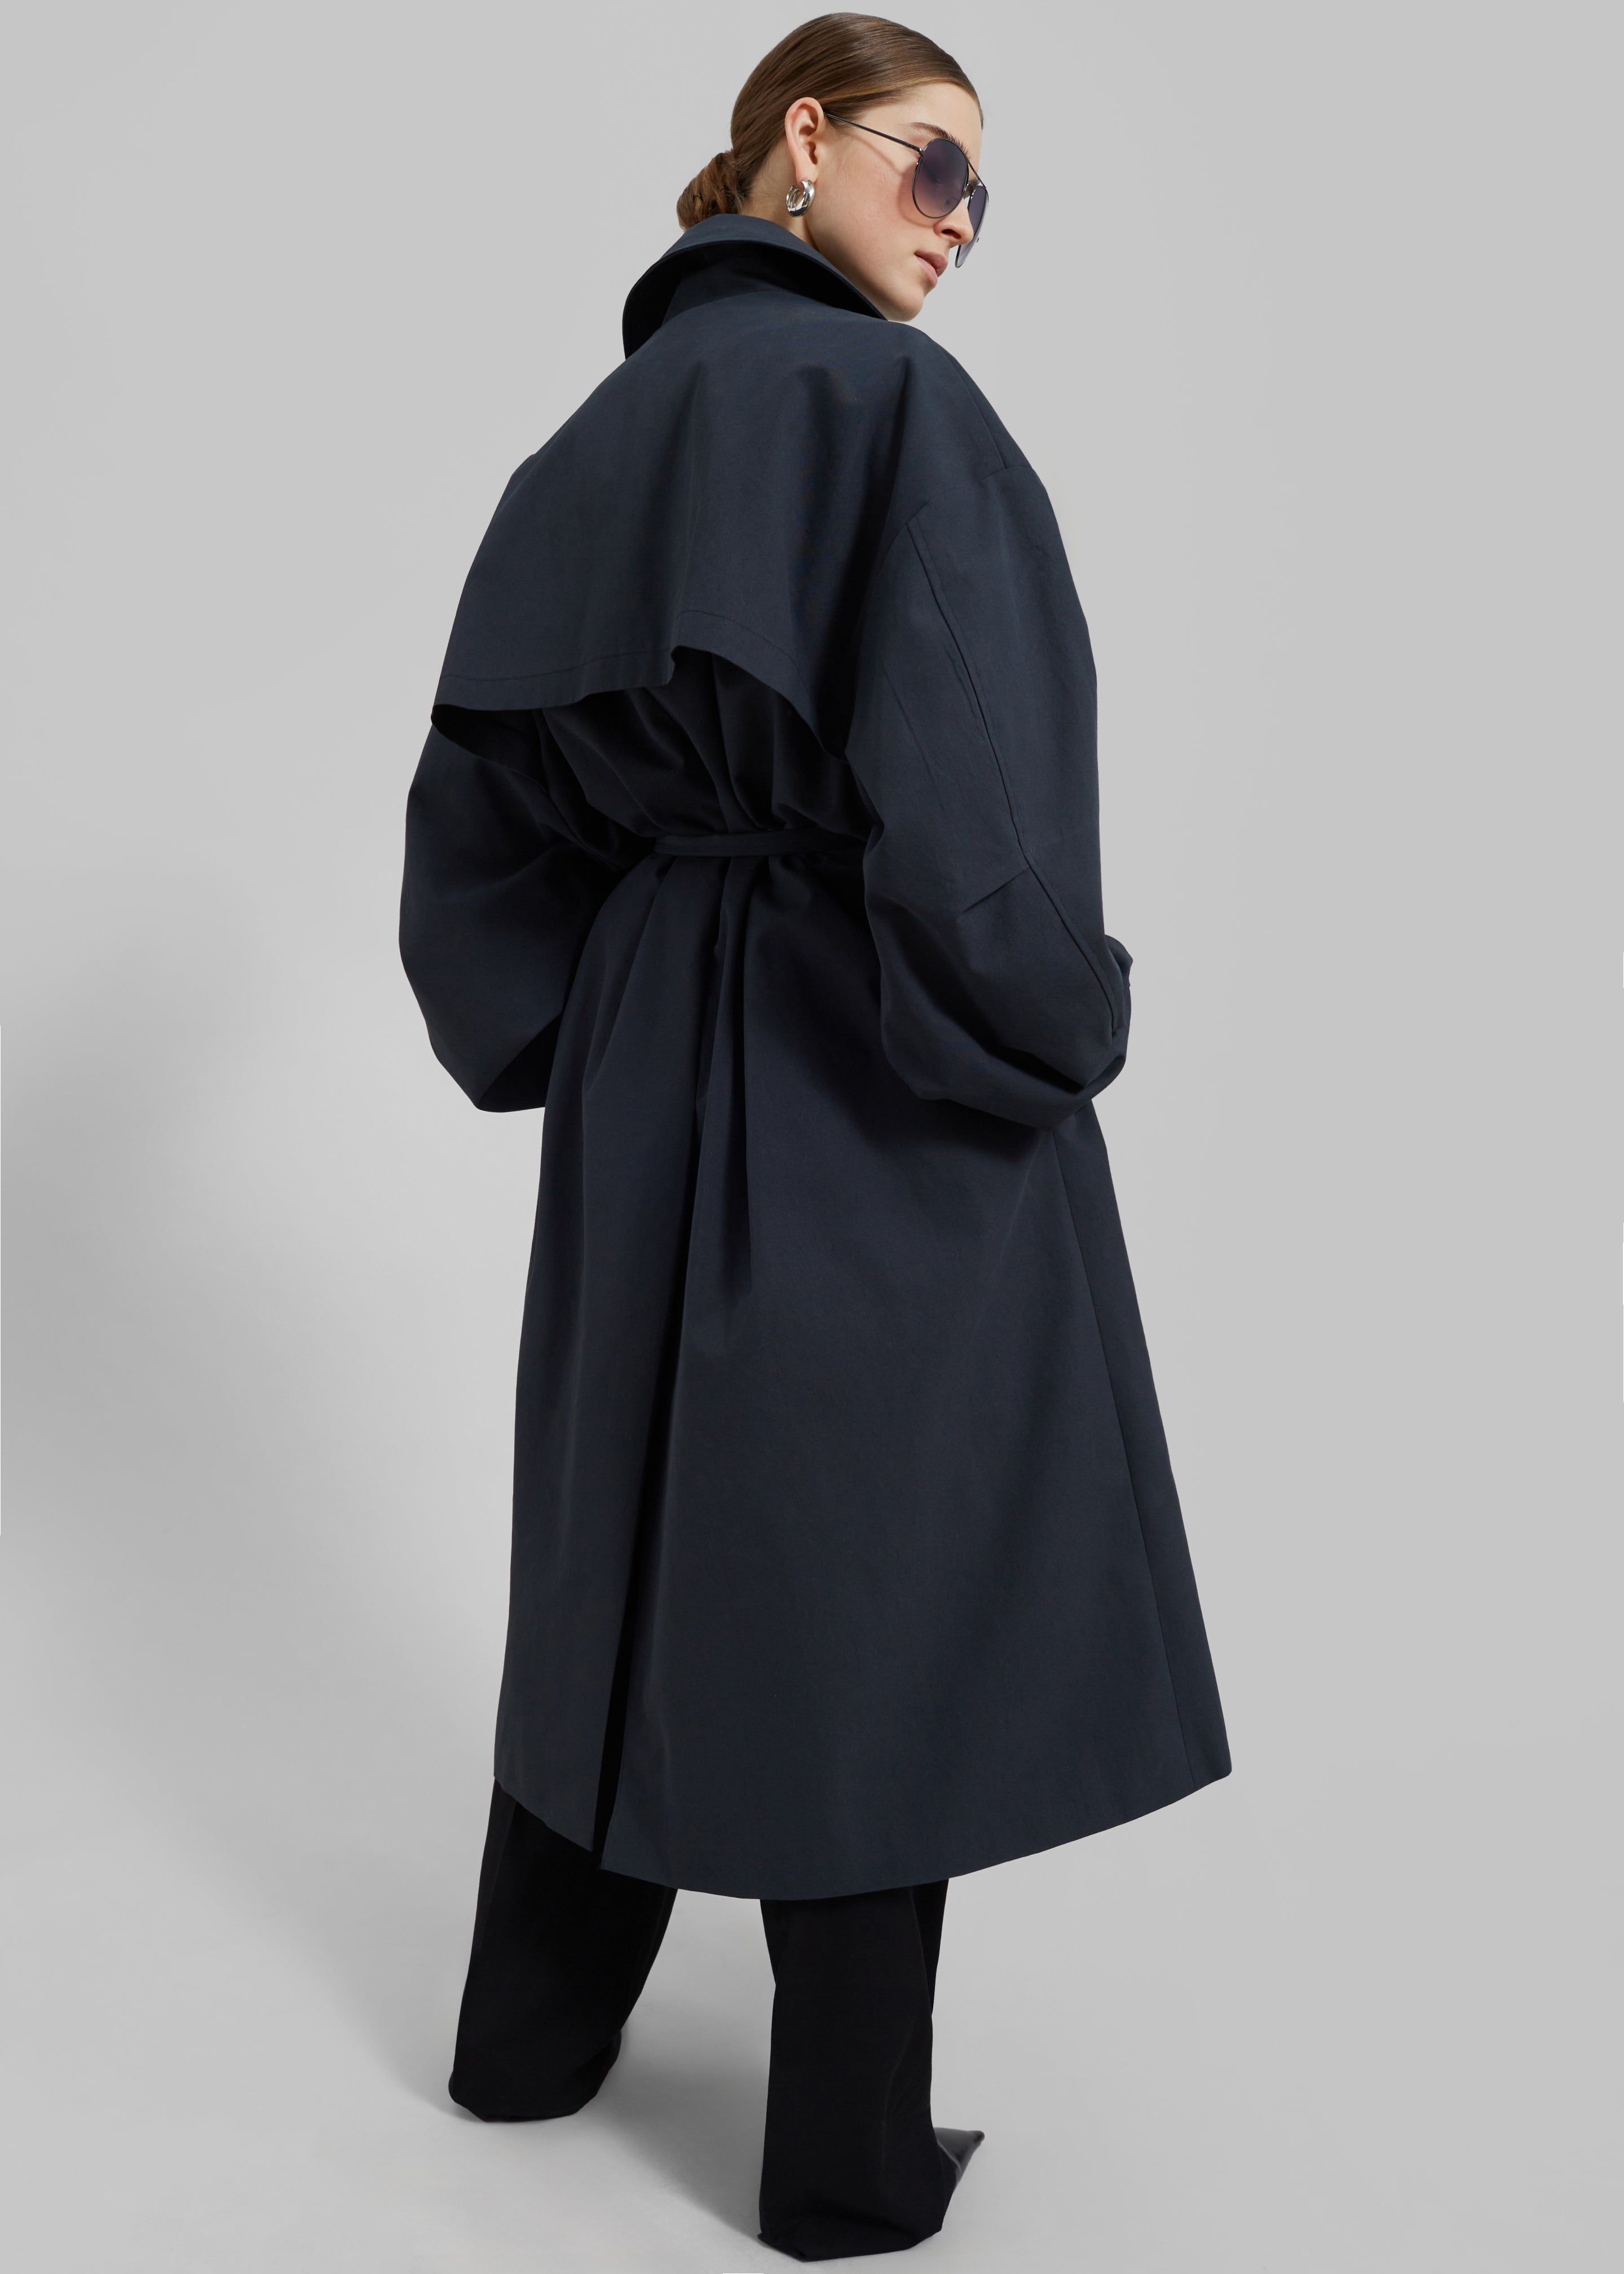 Anika Double Breasted Trench Coat - Navy - 8